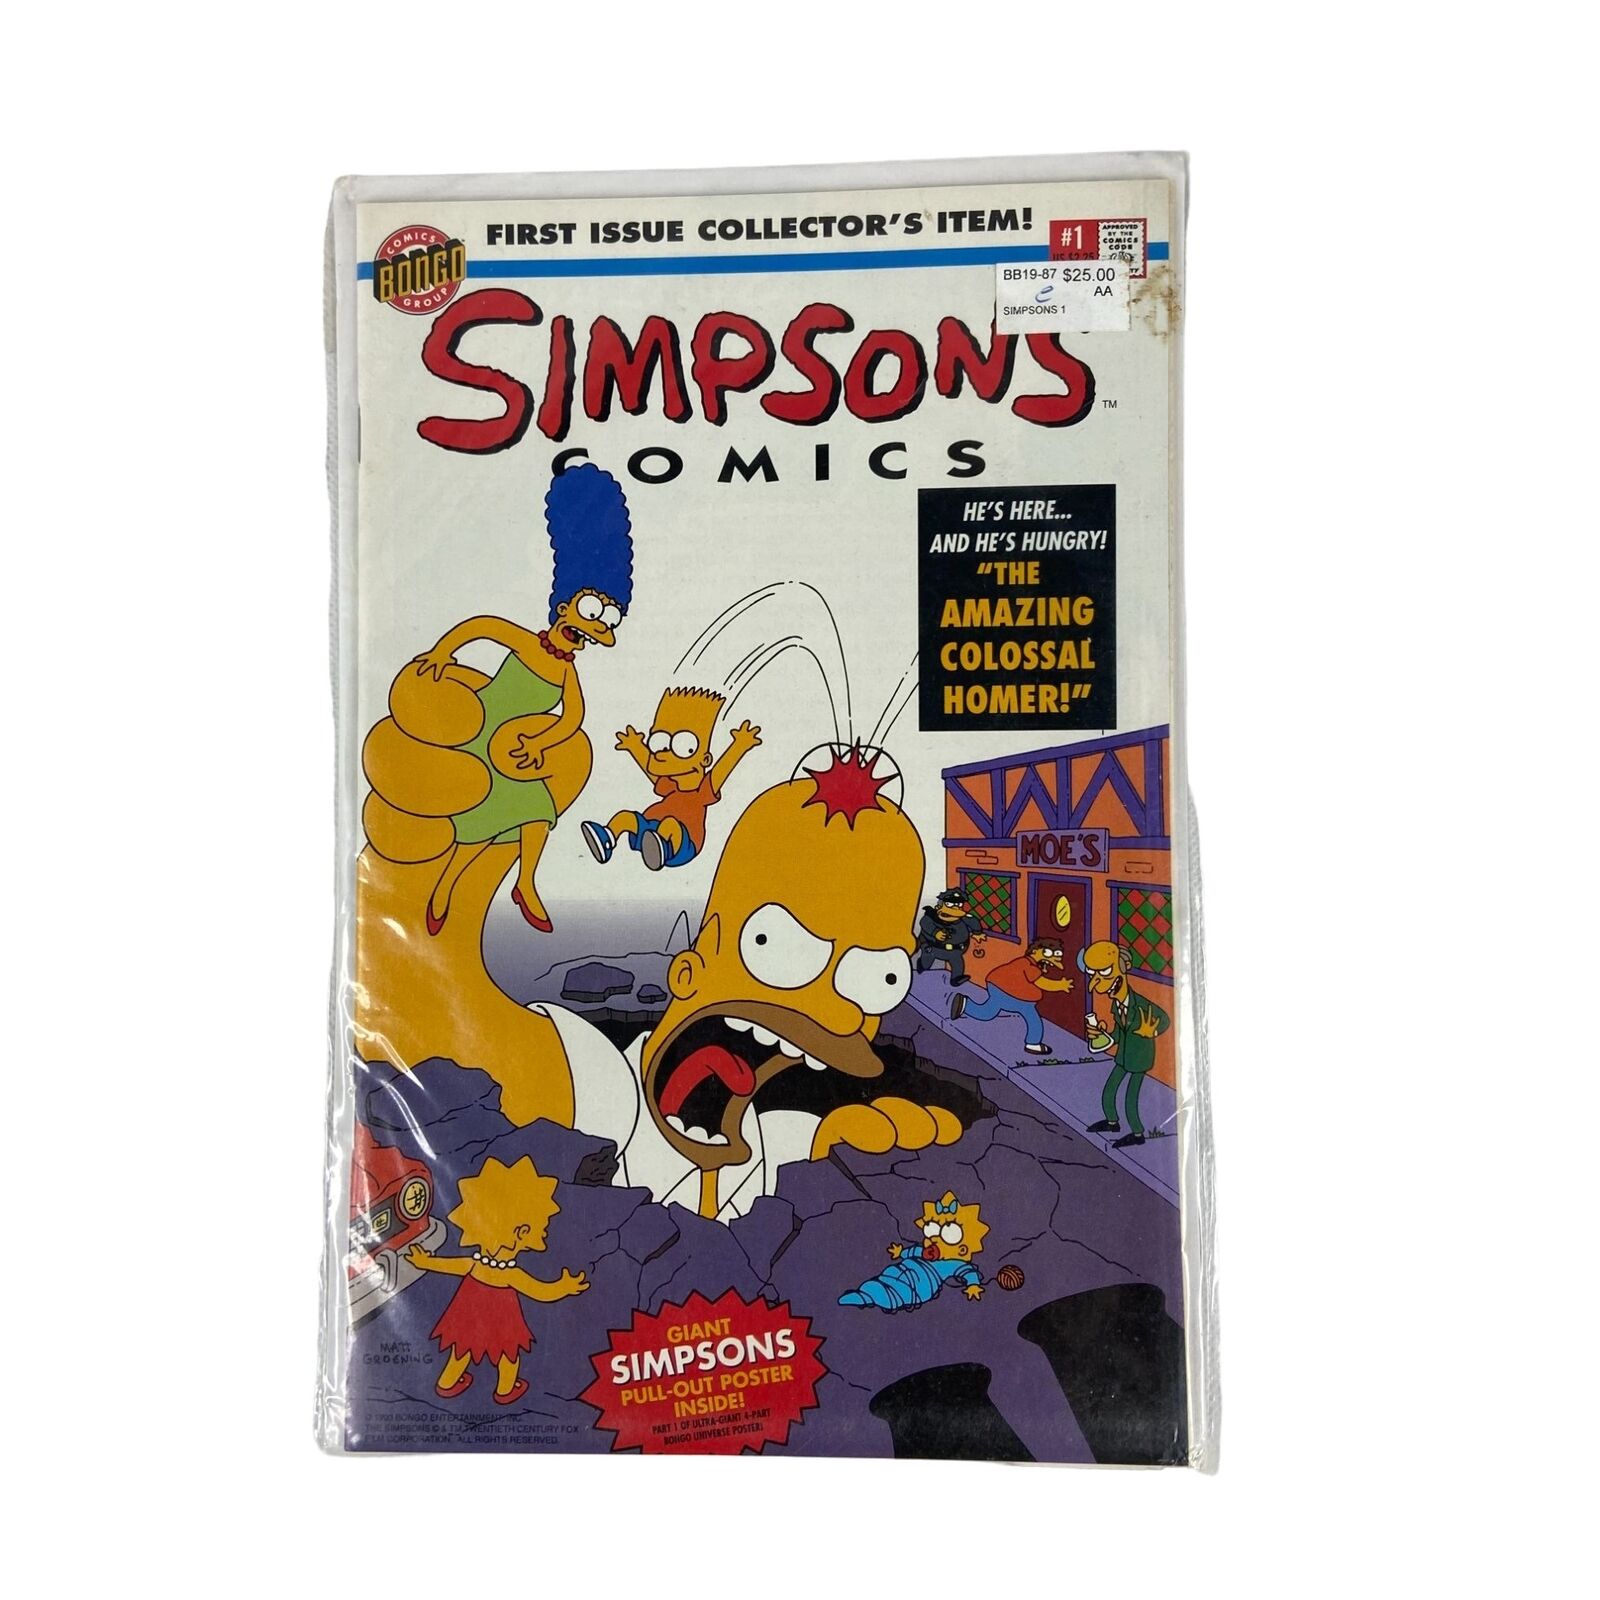 Simpsons Comic Issue 1 1993 With Poster Bongo Amazing Colossal Homer